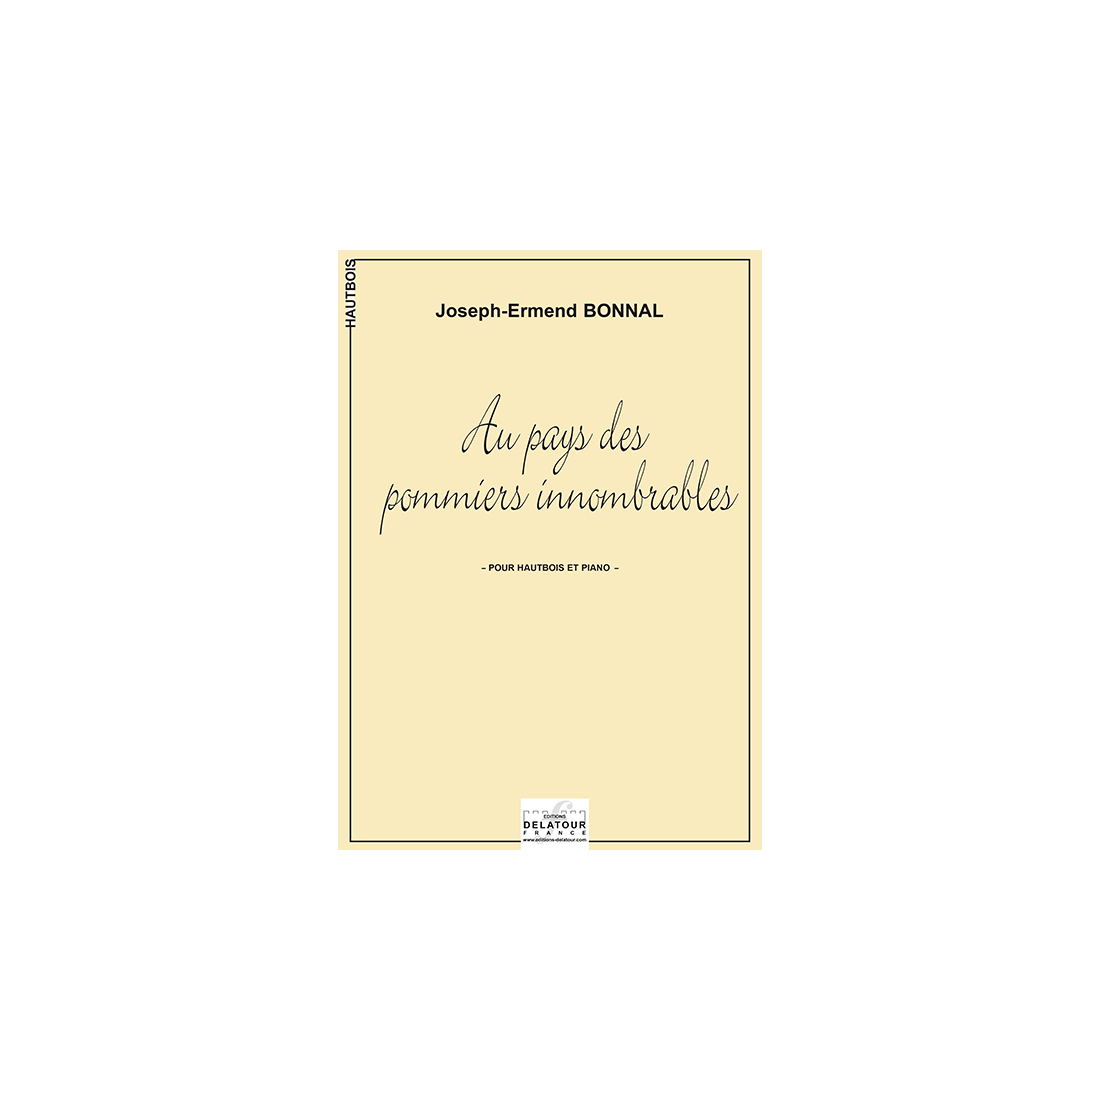 Au pays des pommiers innombrables for oboe and piano